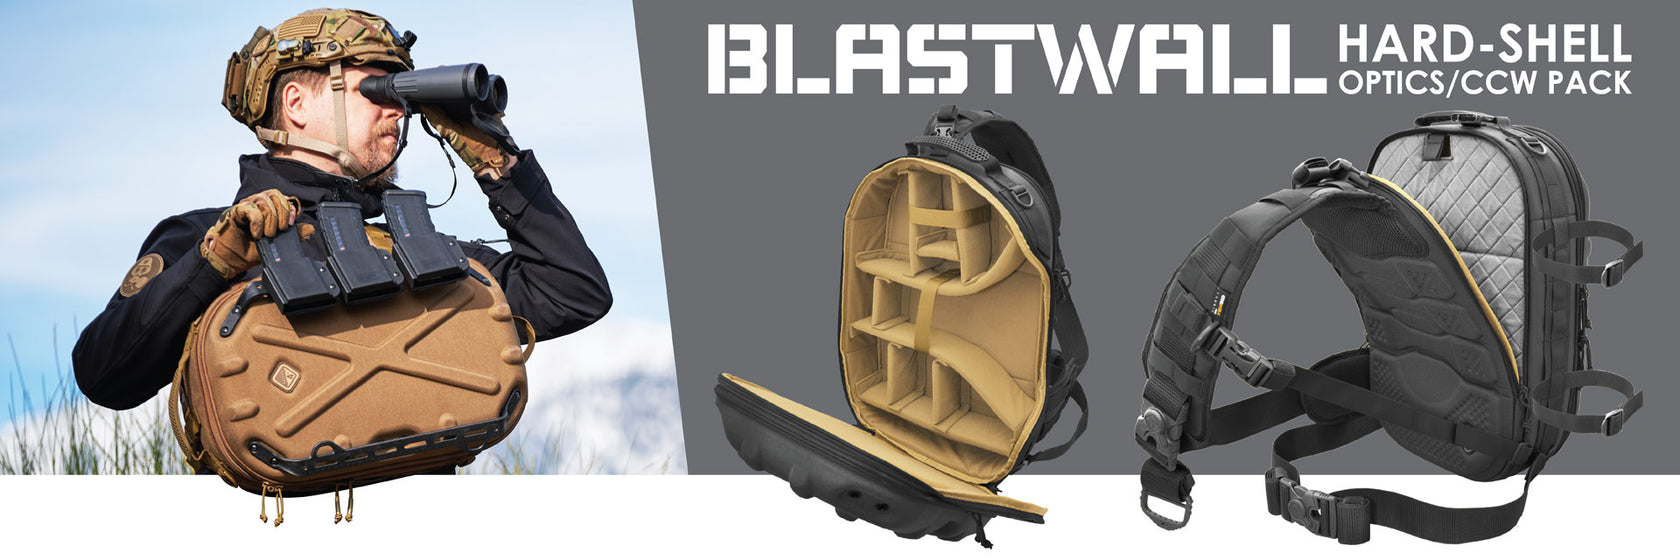 Blastwall™ Optics/CCW Shell Sling-Pack by Hazard 4® - Outdoor, Military,  and Pro Gear - We Ship Internationally